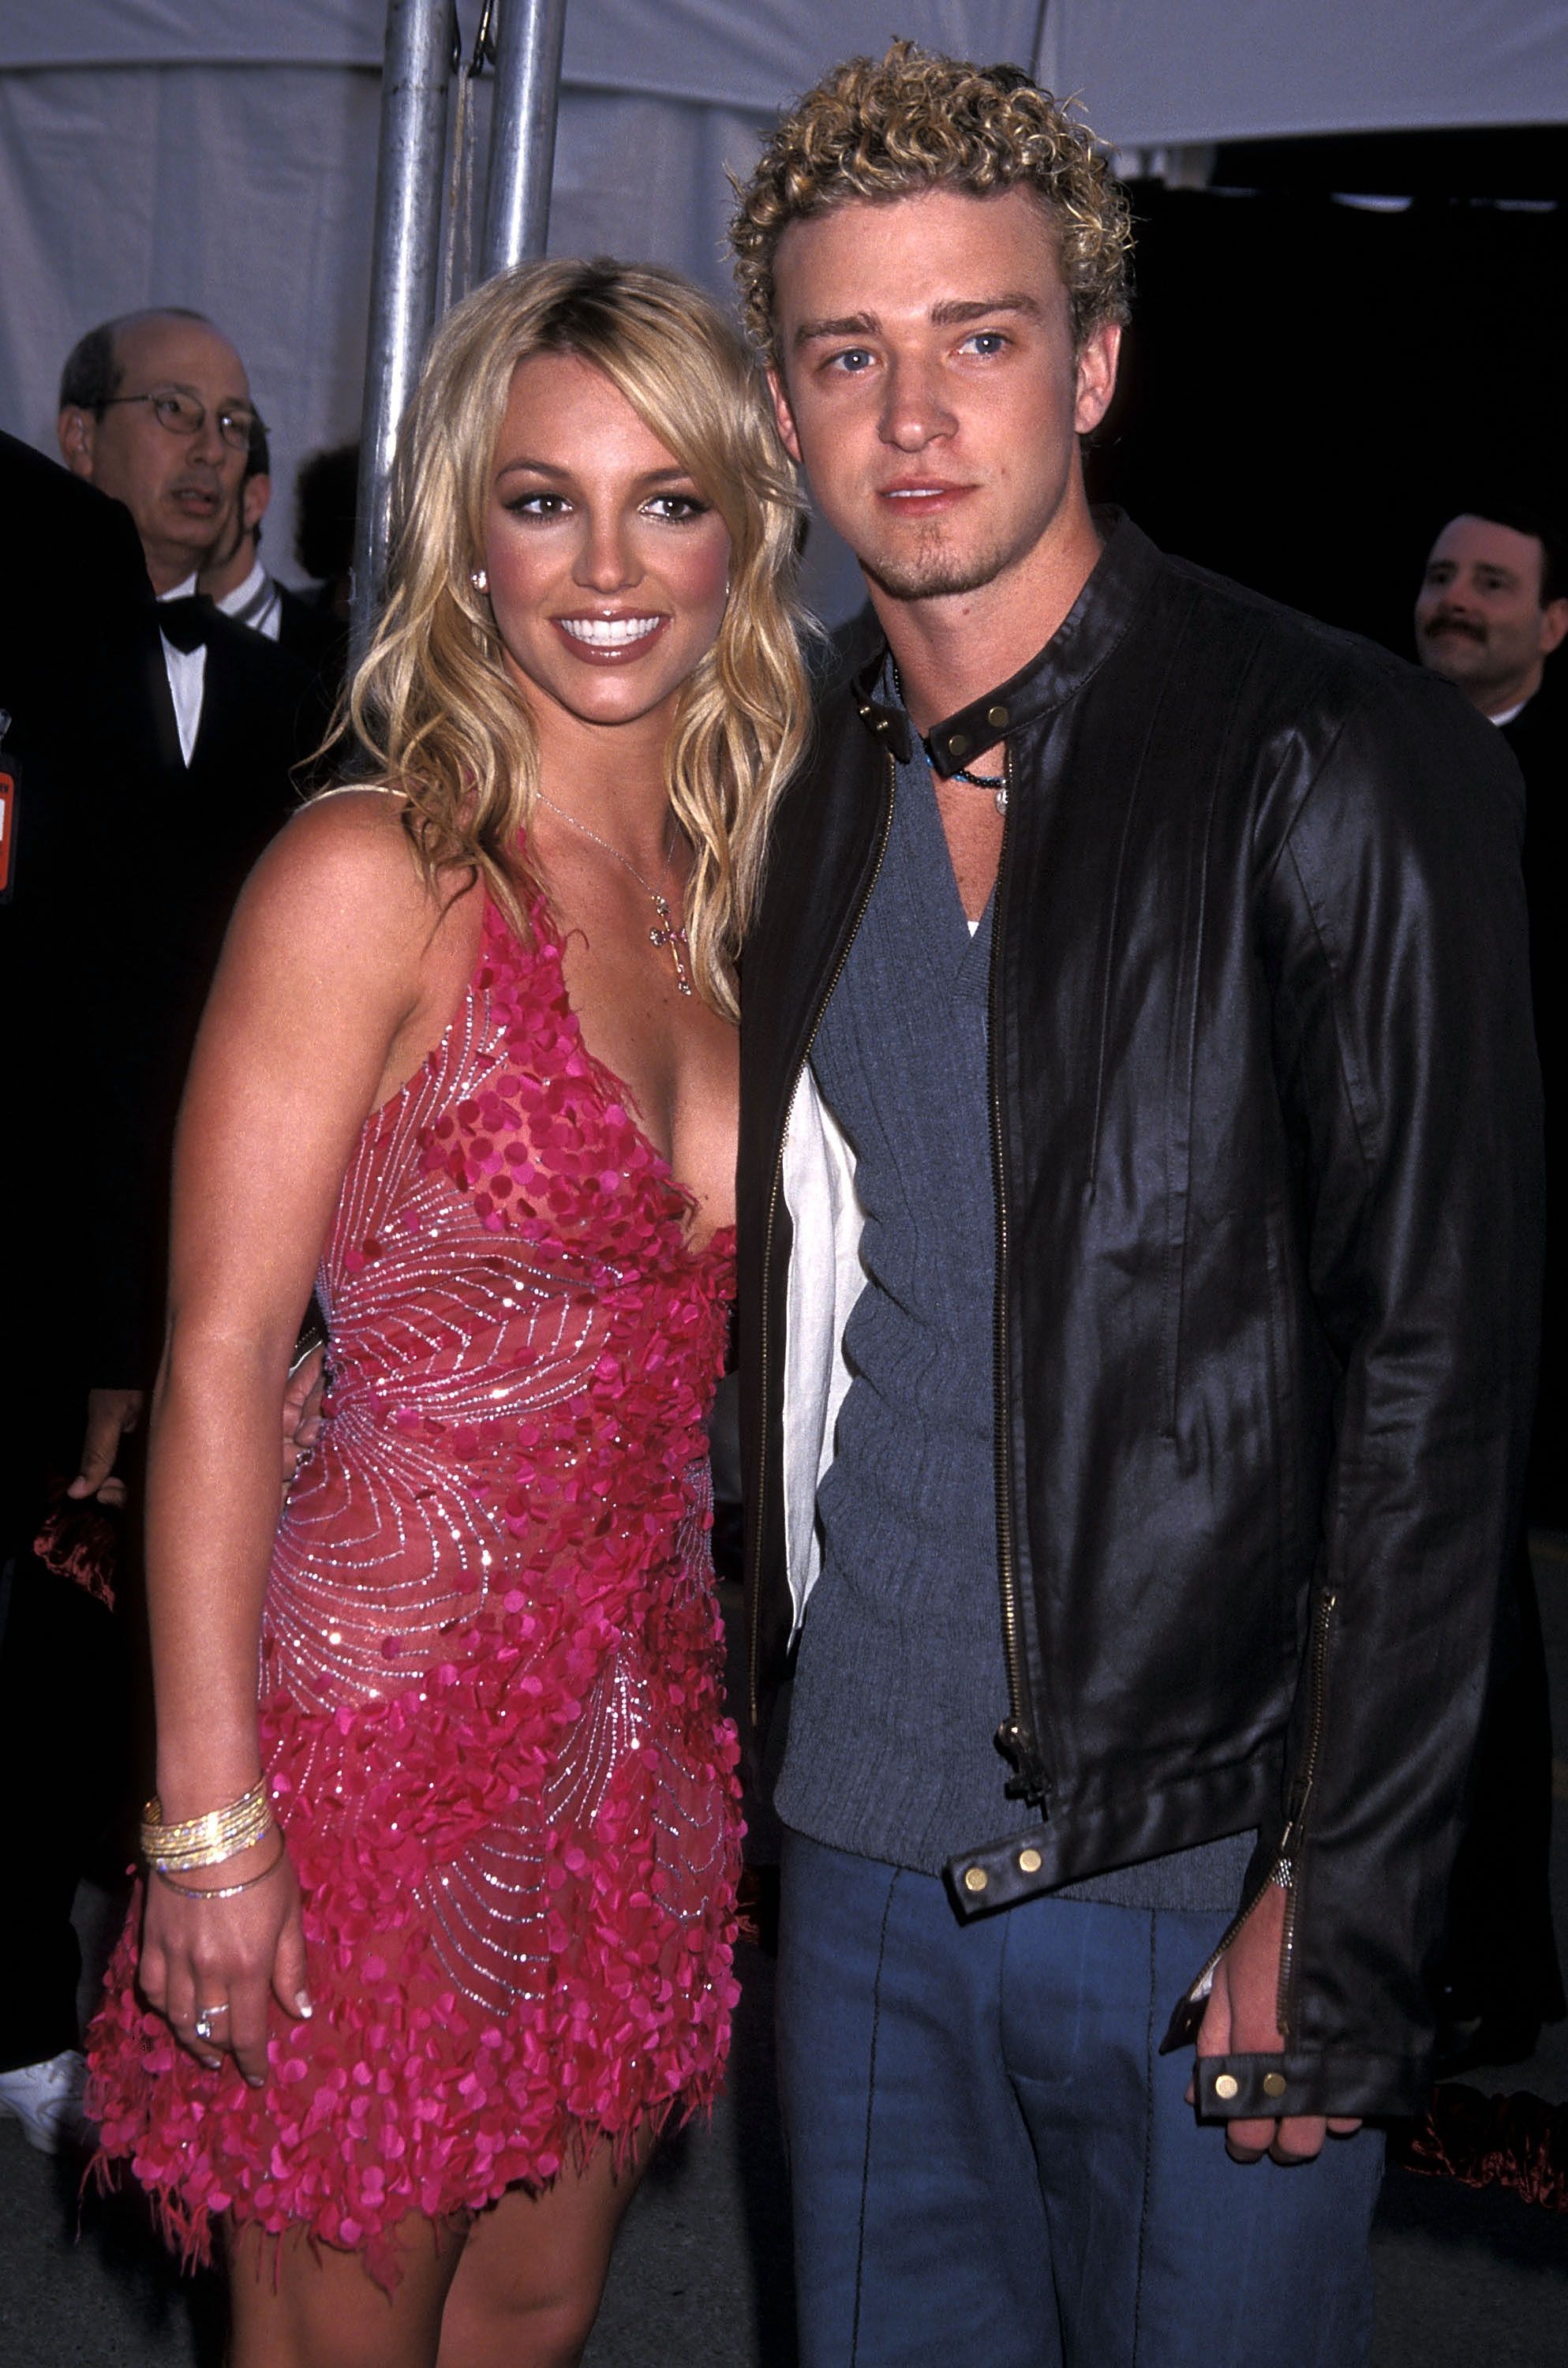 Britney Spears and Justin Timberlake of N'Sync at the 29th Annual American Music Awards in 2002 in Los Angeles | Source: Getty Images